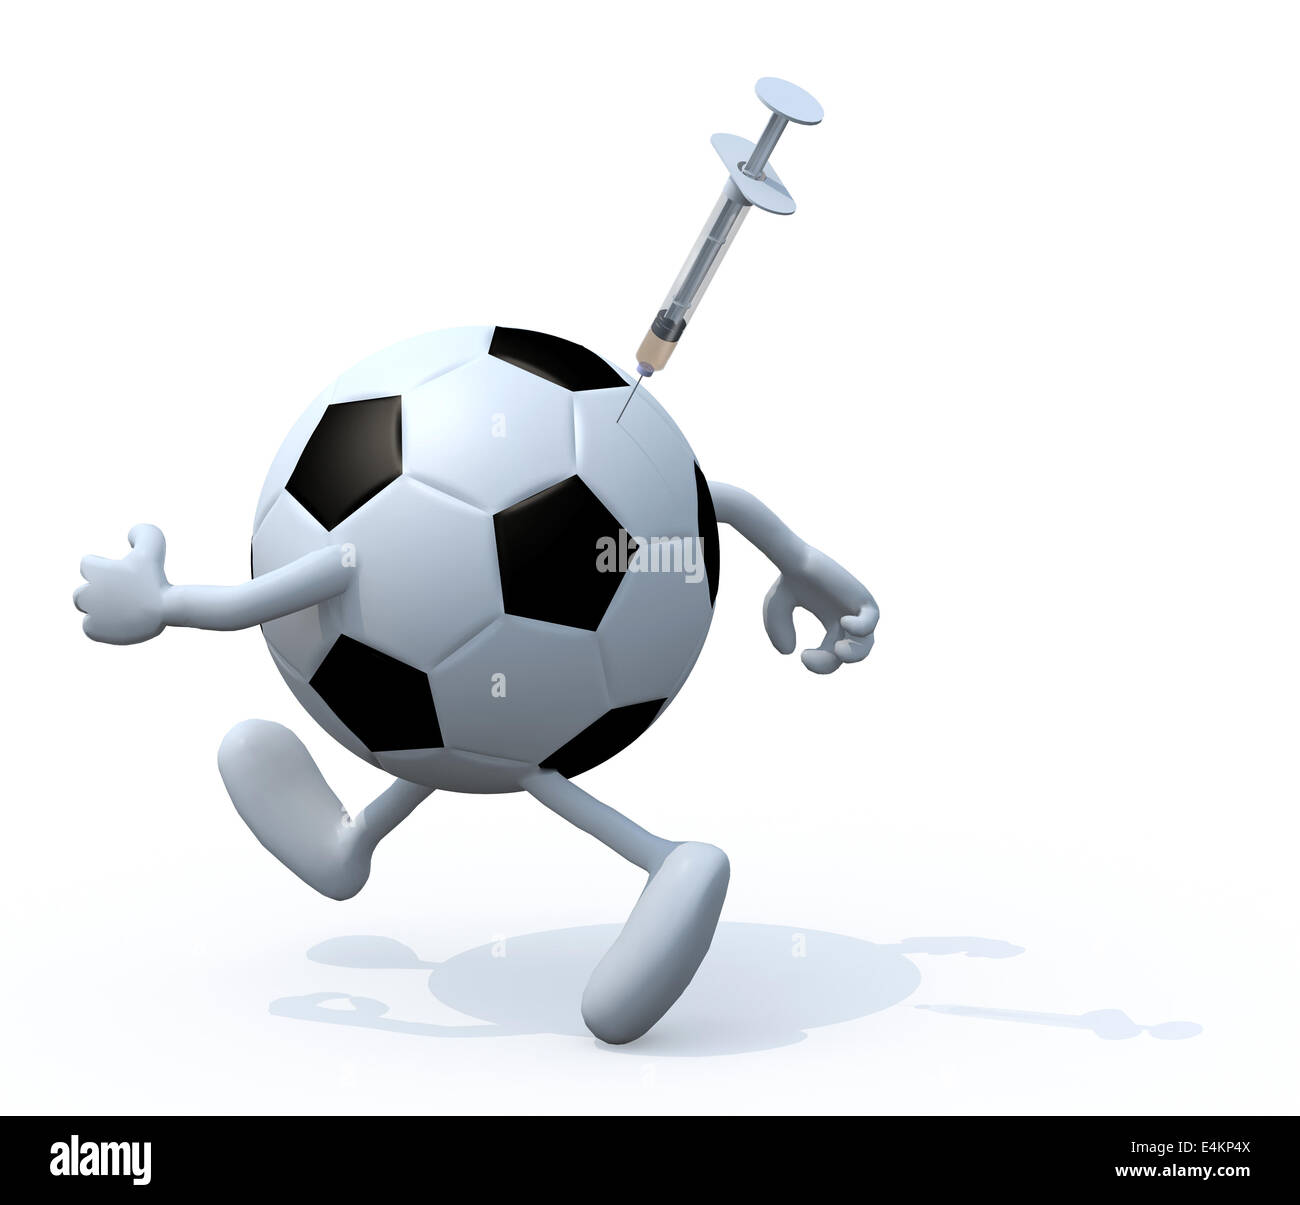 soccer ball with arms and legs running with a syringe skewered on it, doping concepts 3d illustration Stock Photo